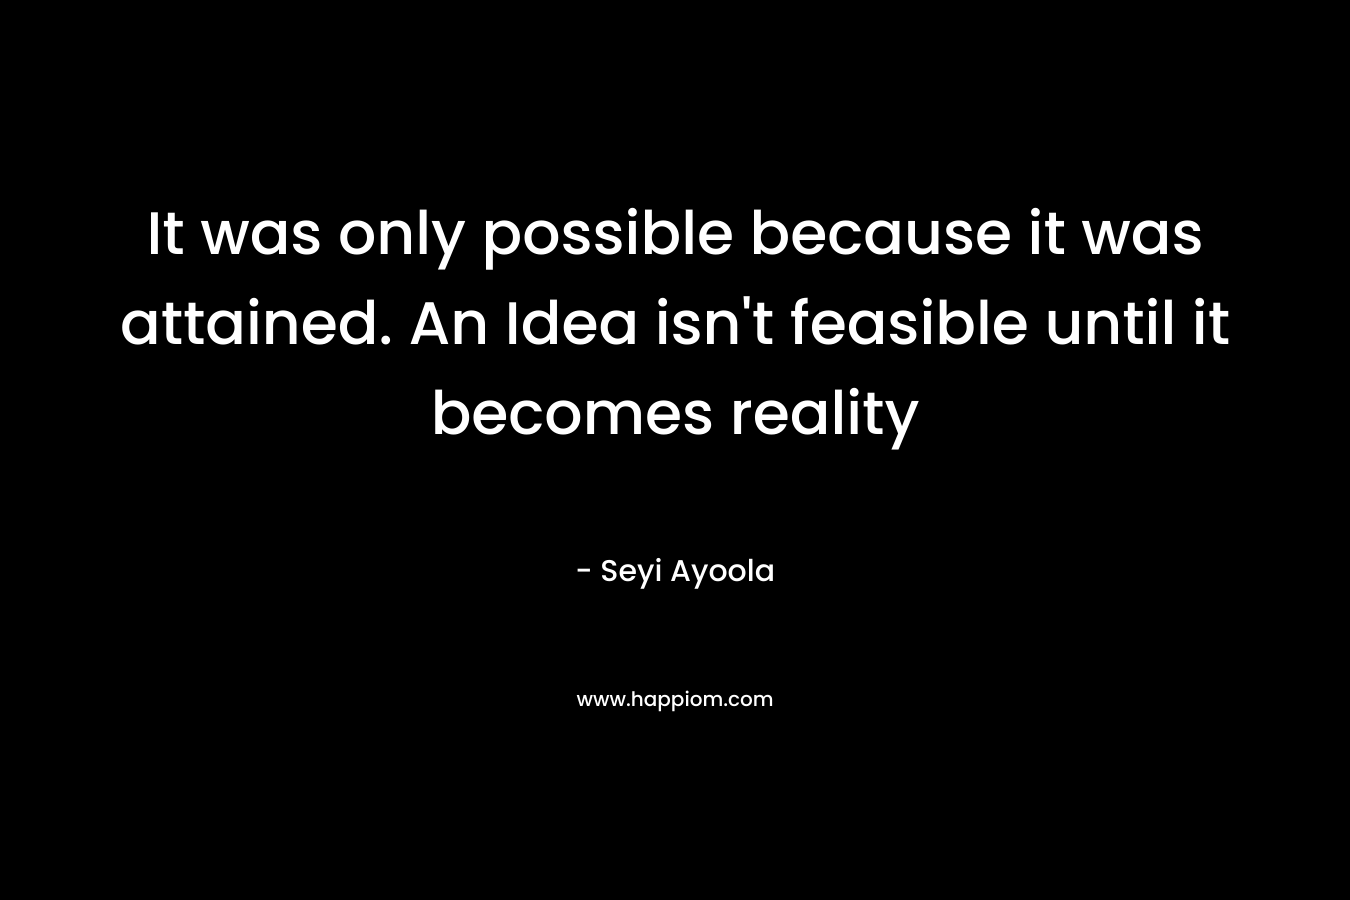 It was only possible because it was attained. An Idea isn't feasible until it becomes reality